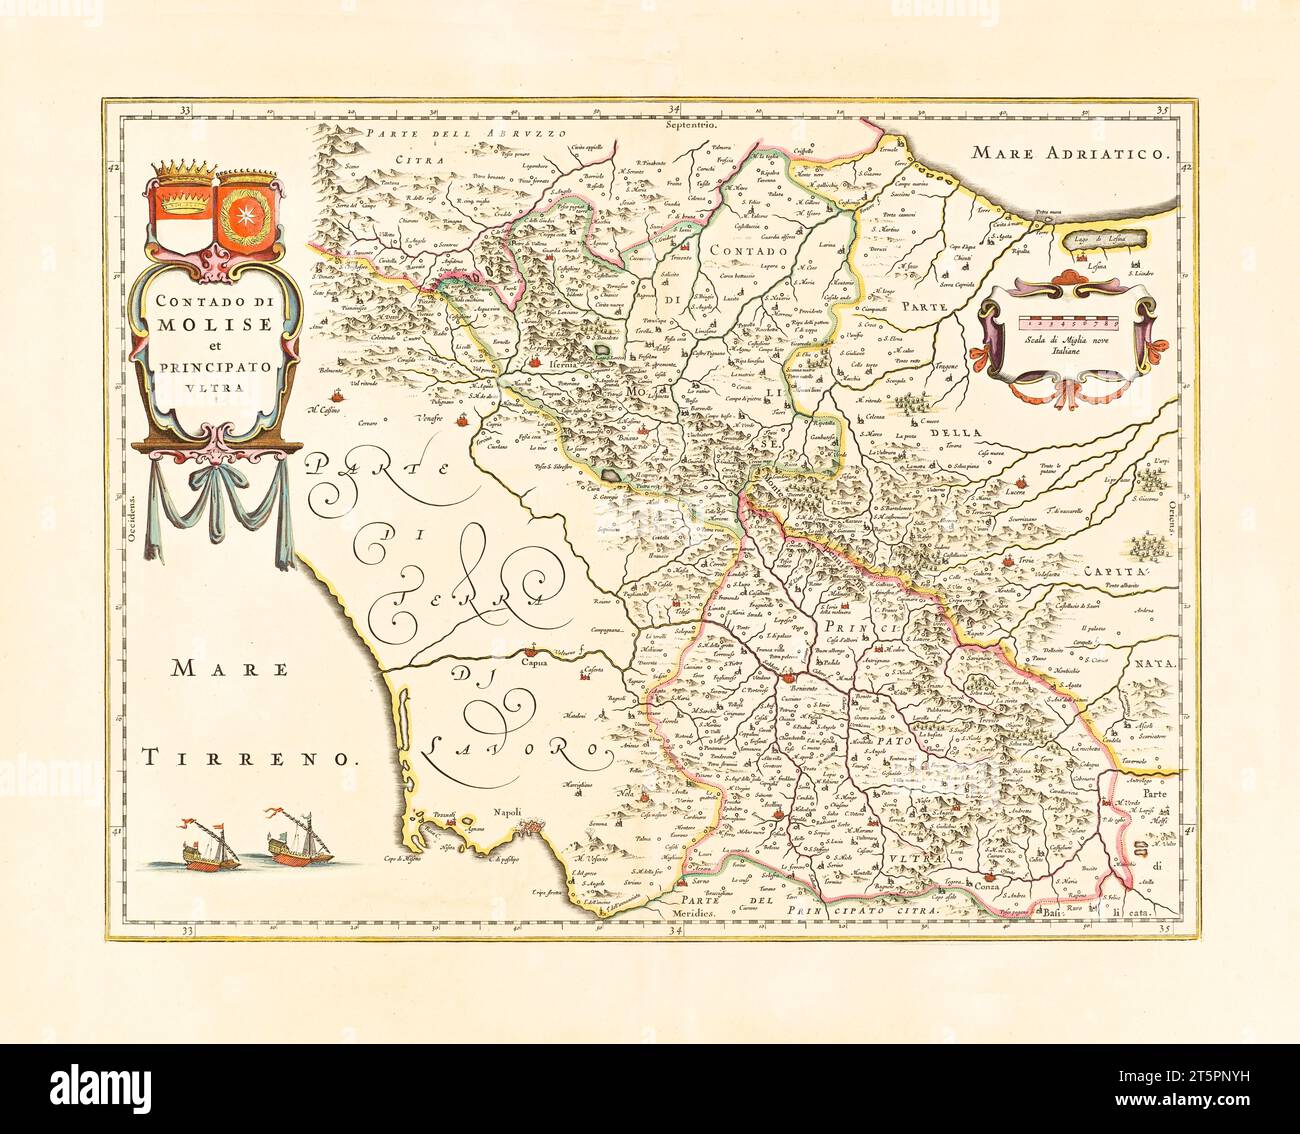 Old map of Molise region, Italy. By Blaeu, publ. ca. 1640 Stock Photo